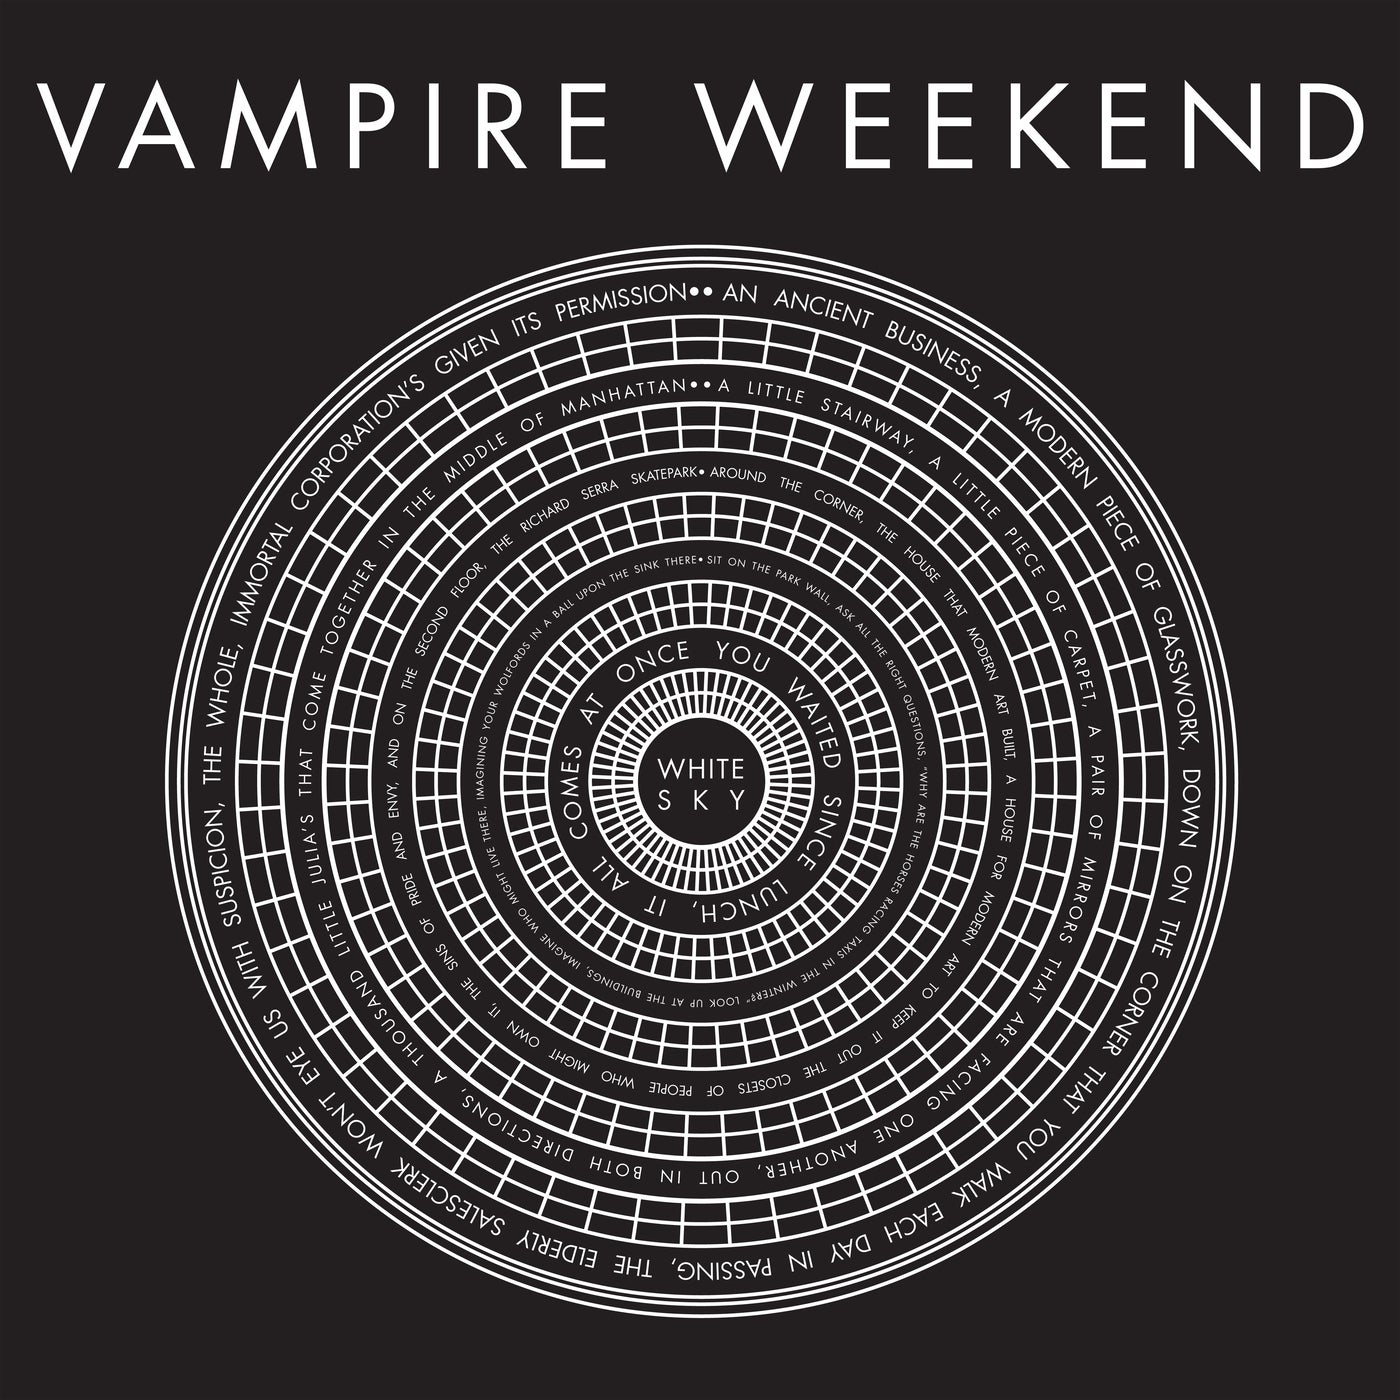 Vampire weekend only god was above us. Vampire weekend обложка. Vampire weekend Vampire weekend обложка альбома. Vampire weekend White Sky 7" 2010. Vampire weekend contra обложка.